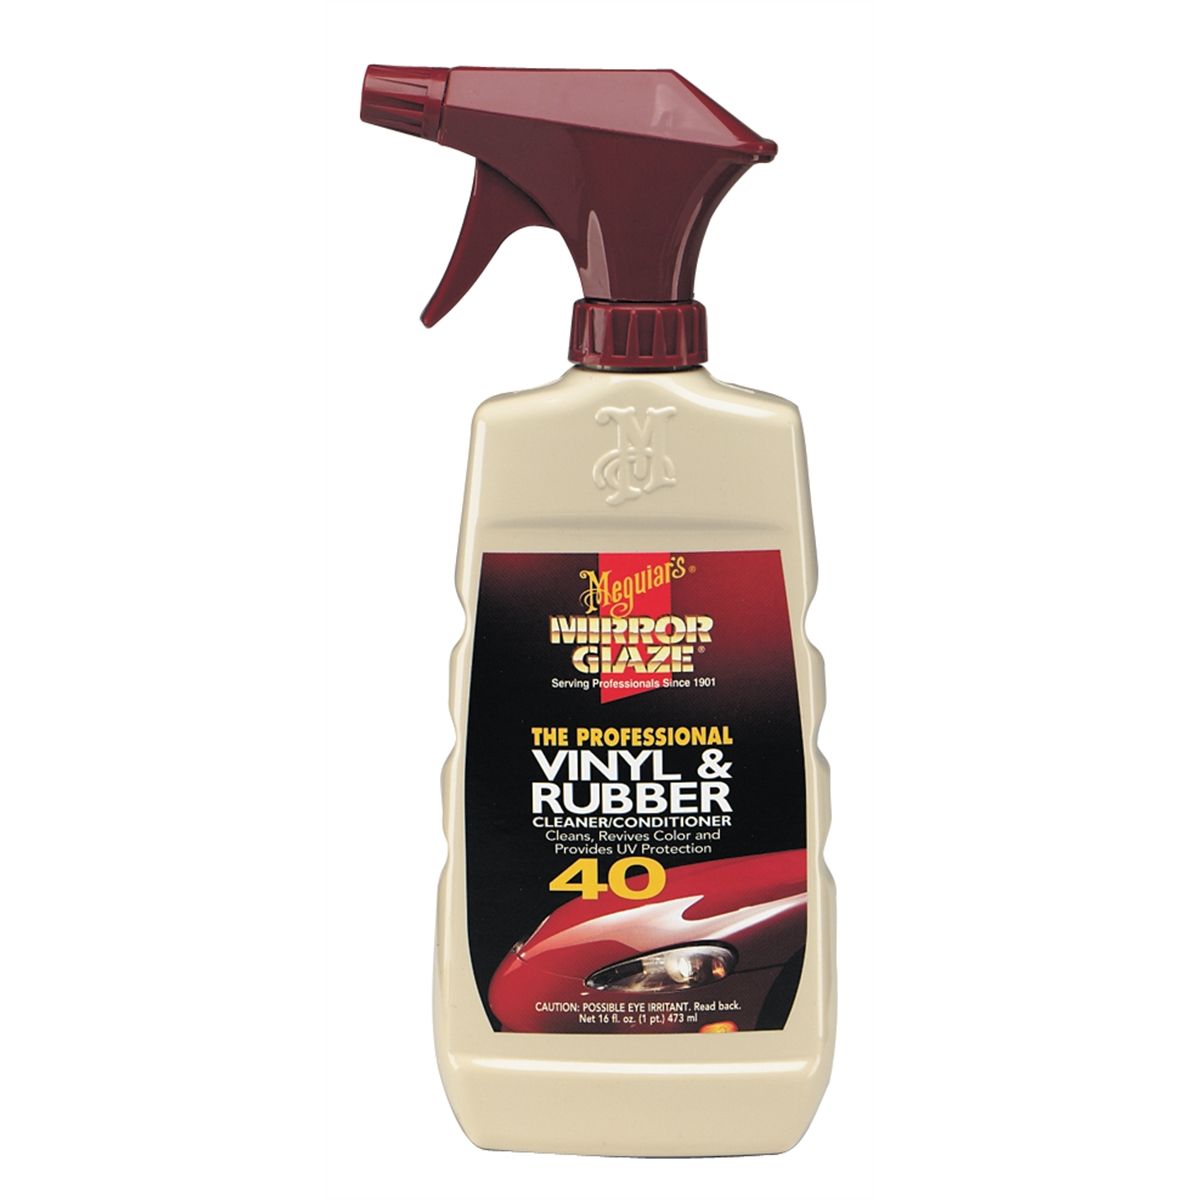 Vinyl and Rubber Cleaner / Conditioner - 16 Oz